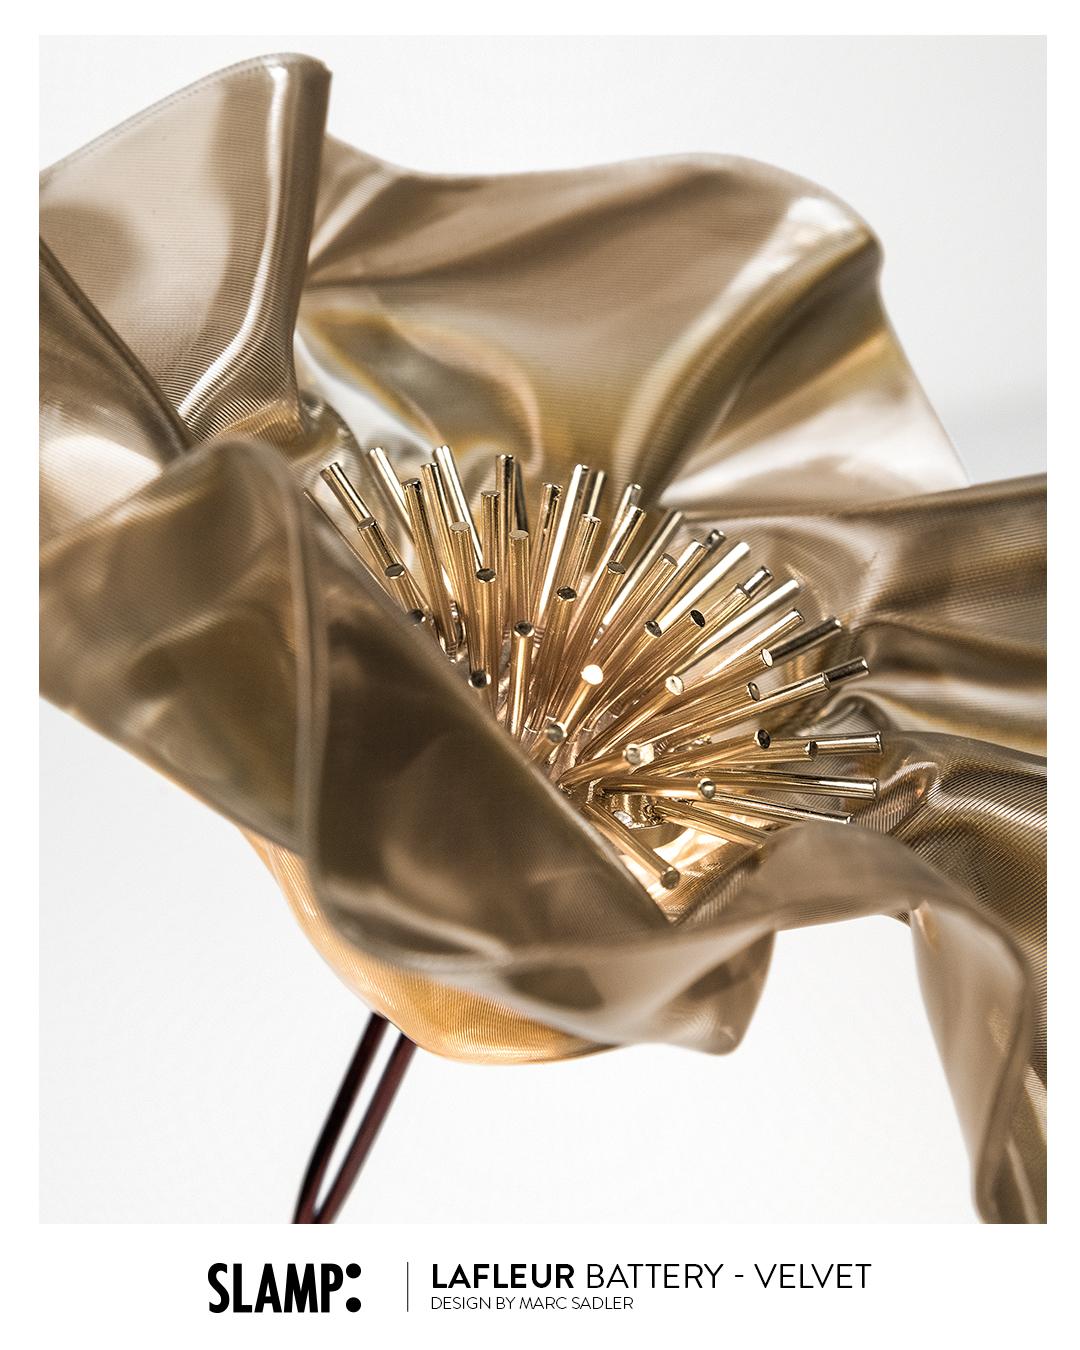 Marc Sadler embraced Slamp’s original technopolymers to stretch design boundaries, creating LaFleur, a delicate, rechargeable bloom that comes to light through heating and hand-molding Lentiflex®. The material warmed using a controlled temperature,